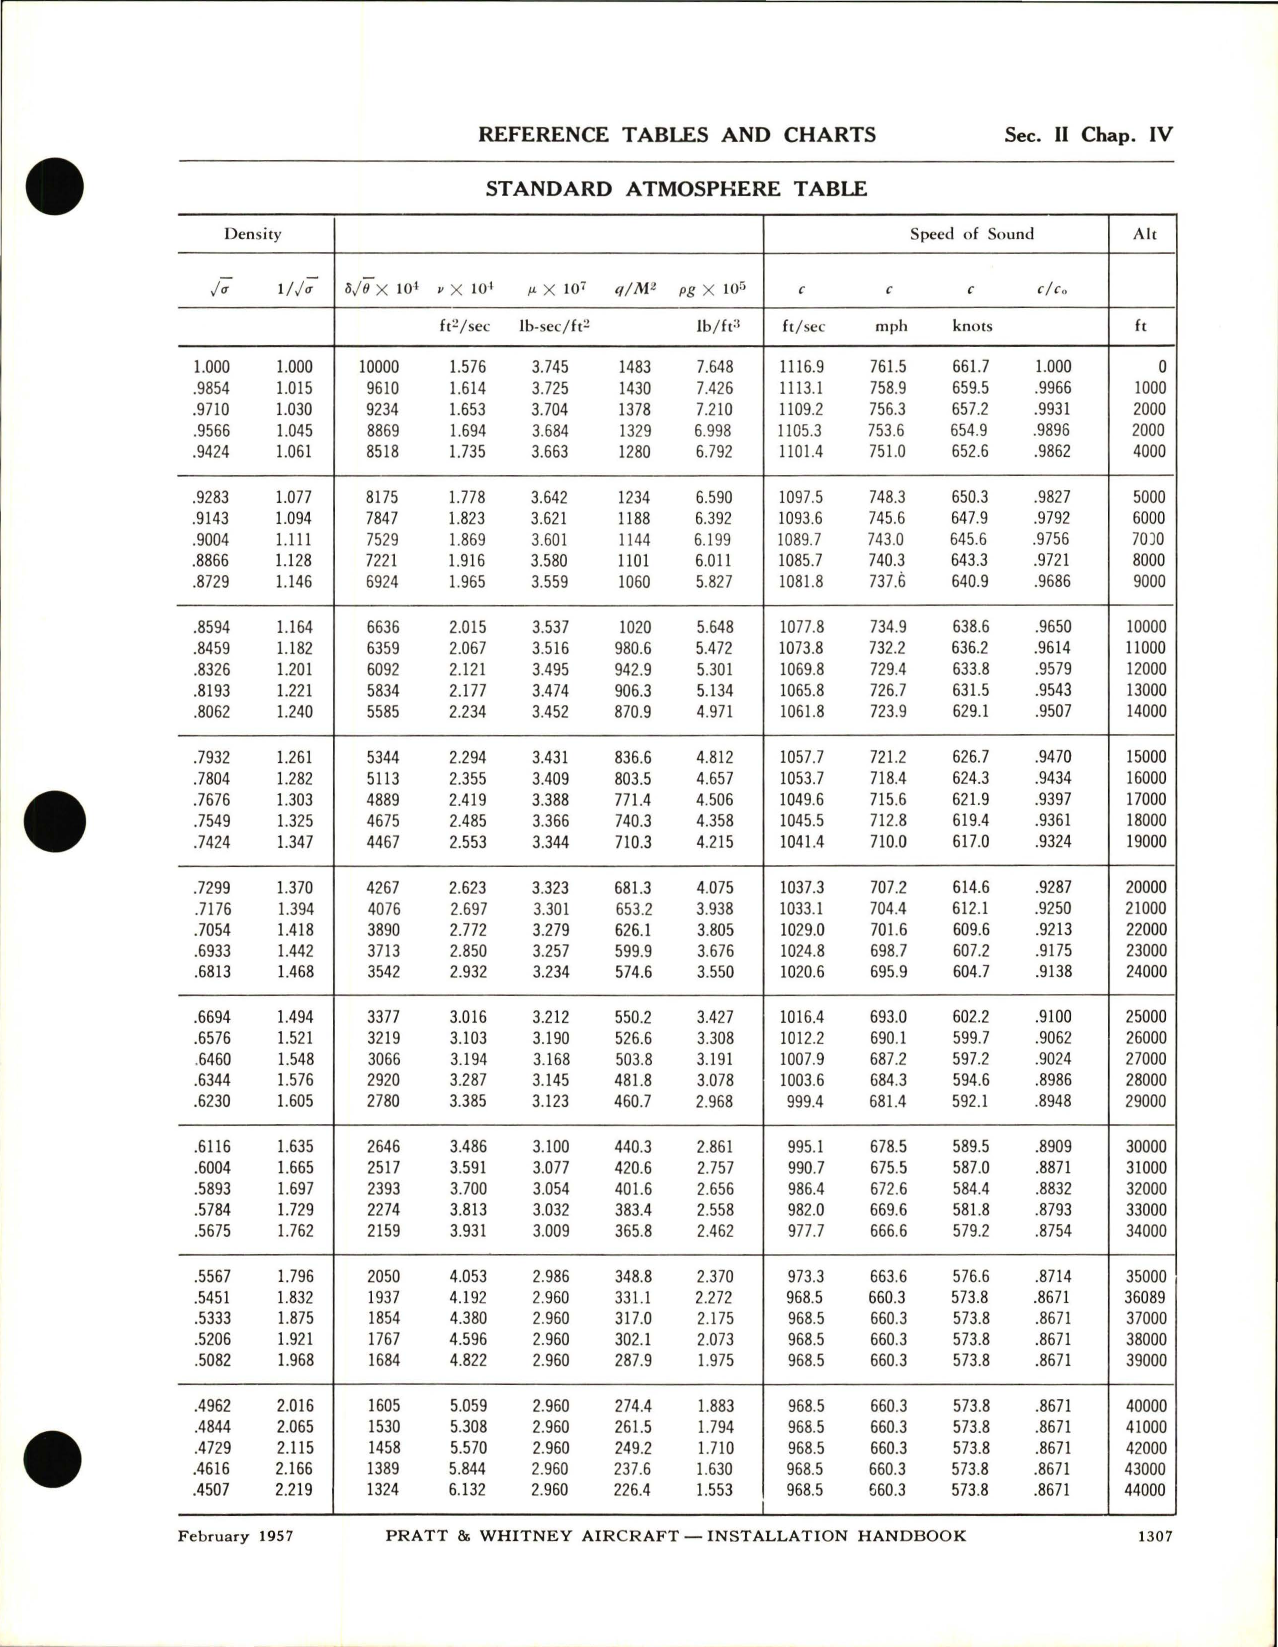 Sample page 5 from AirCorps Library document: Installation Handbook for Reference Tables and Charts 